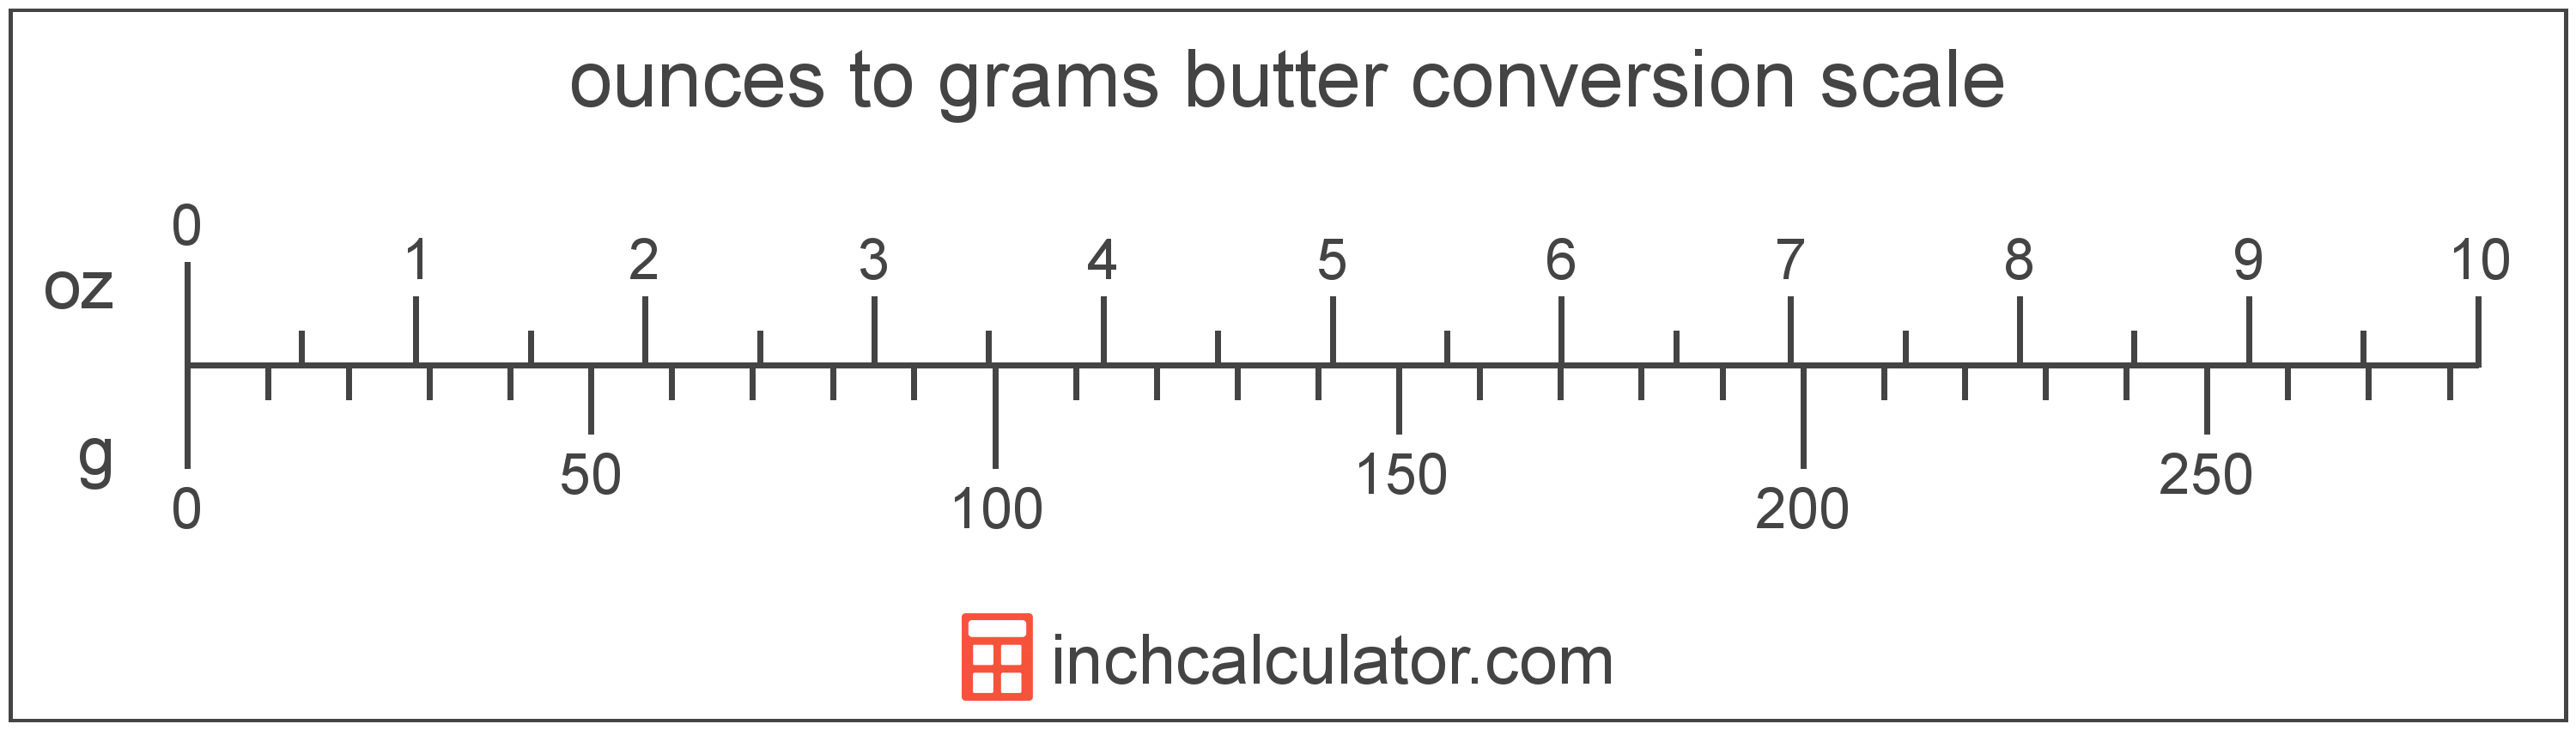 conversion scale showing ounces and equivalent grams butter values